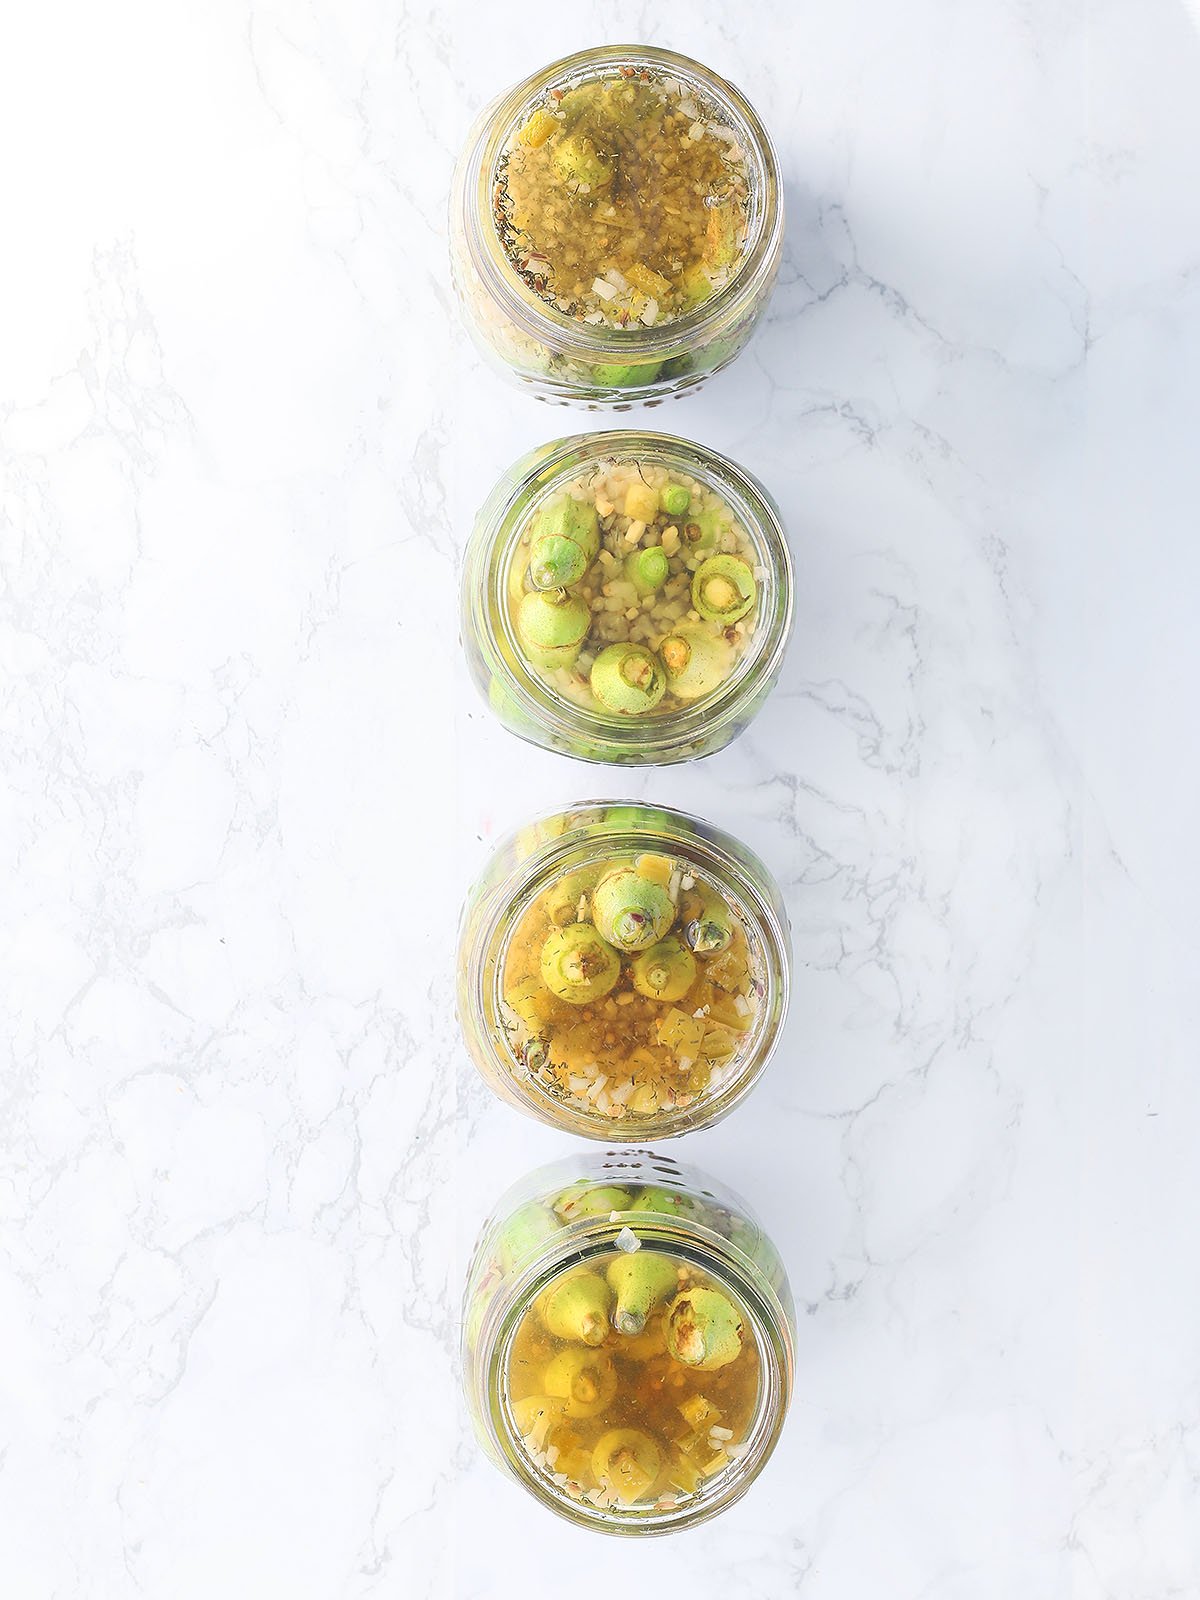 Four open jars of pickled okra lined up on a marble background.